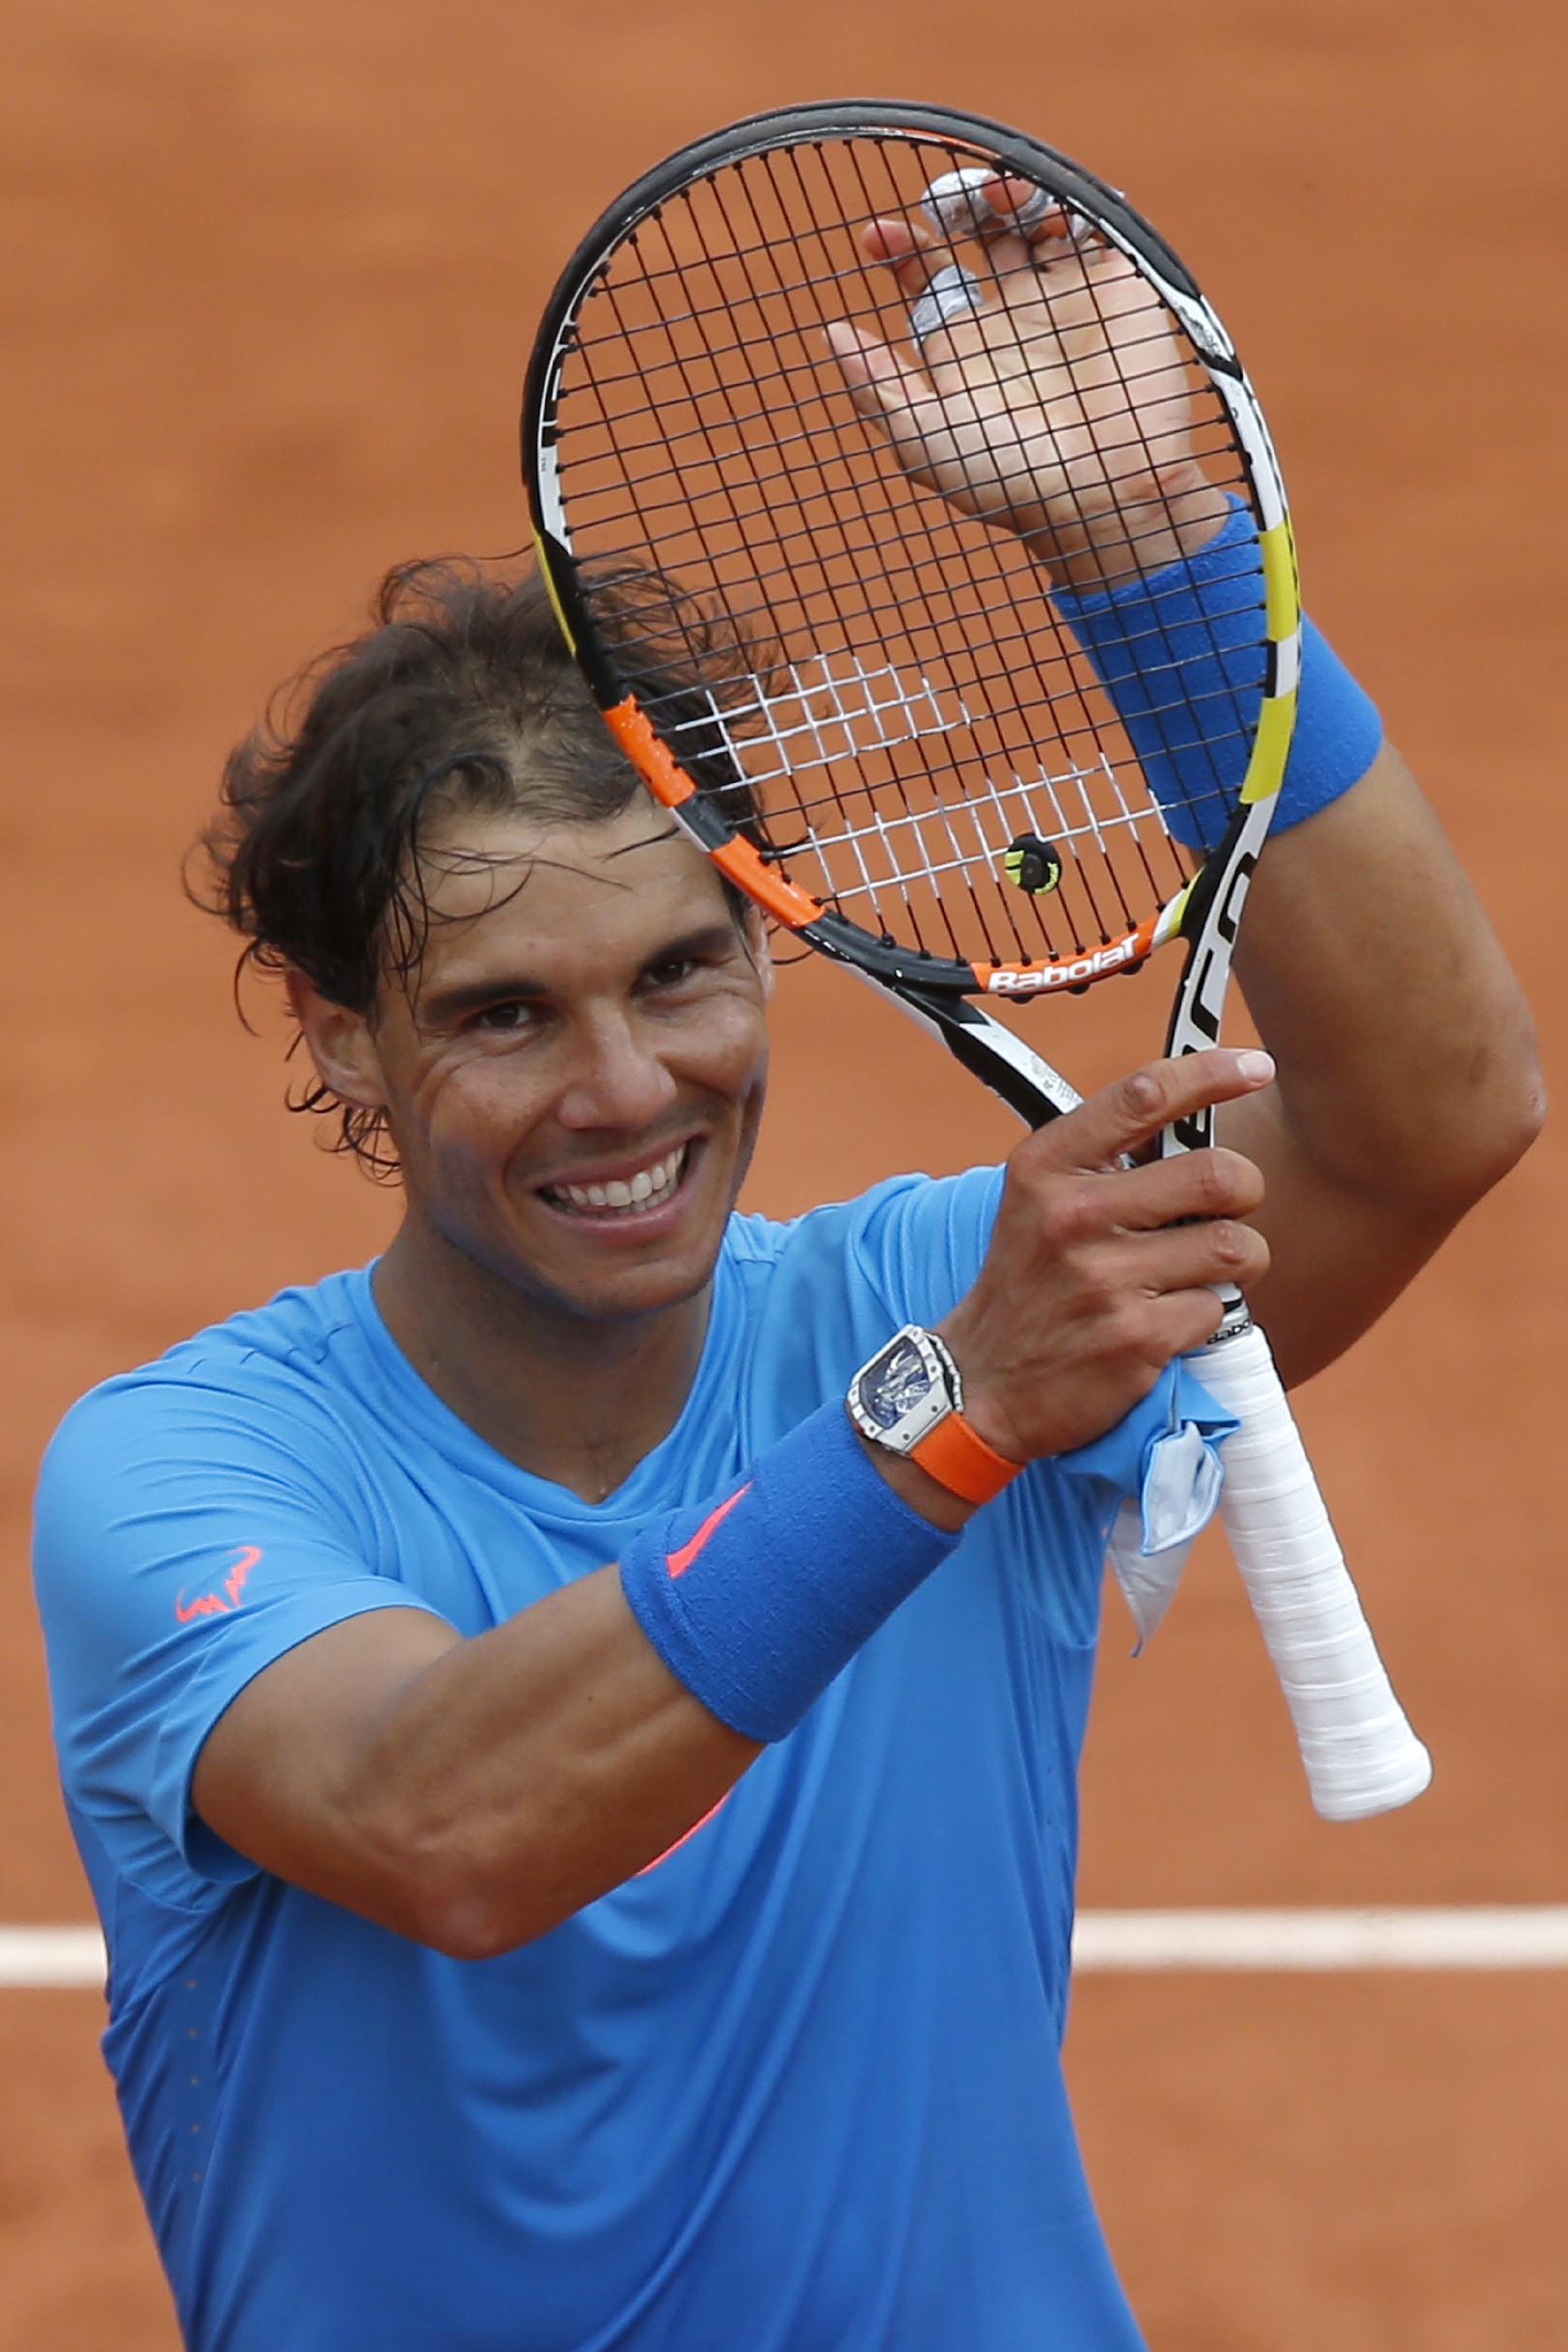 French Open: Rafael Nadal starts title defence with win [PHOTOS] – Rafael Nadal Fans